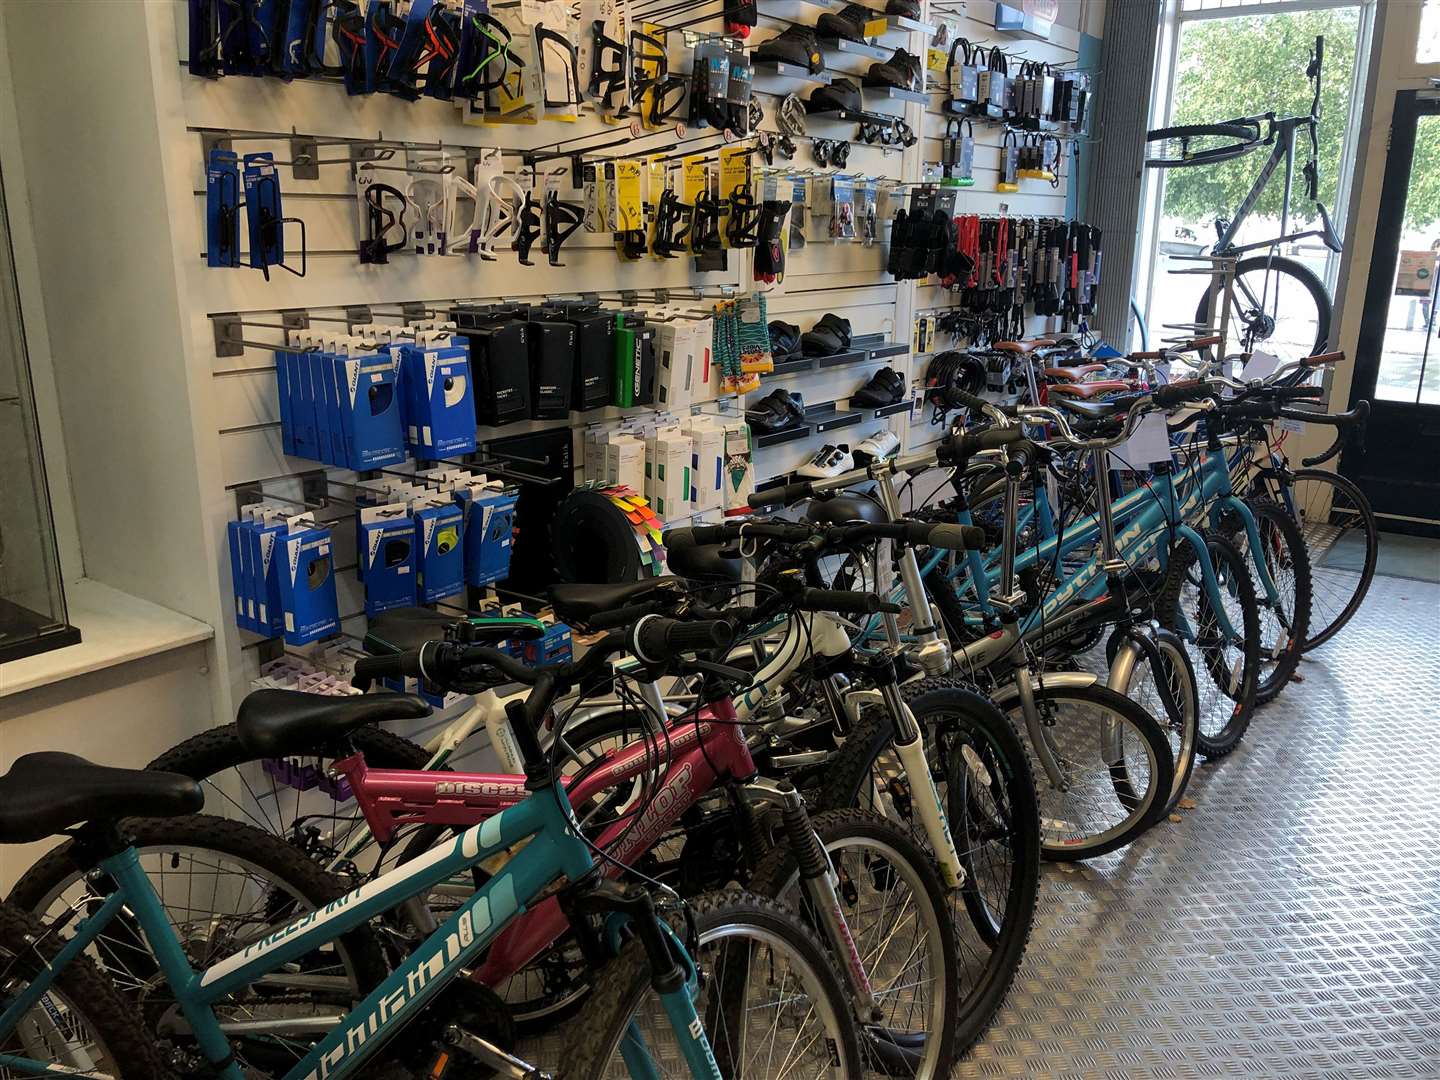 It was hoped the bike shop would be saved